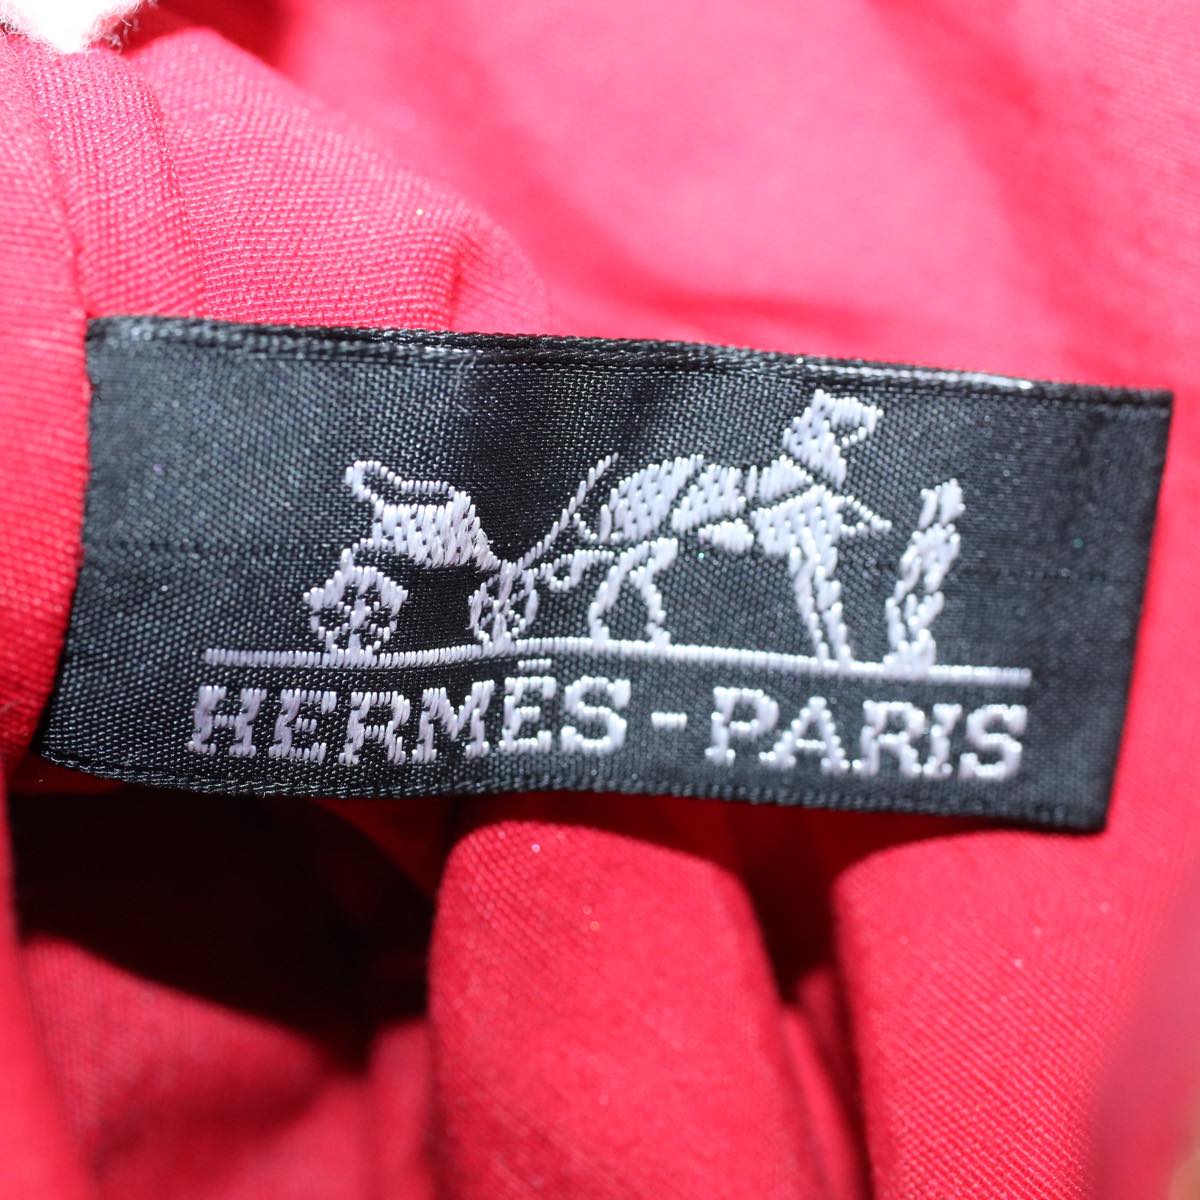 HERMES Bolide PM Pouch Canvas Red Auth bs8824